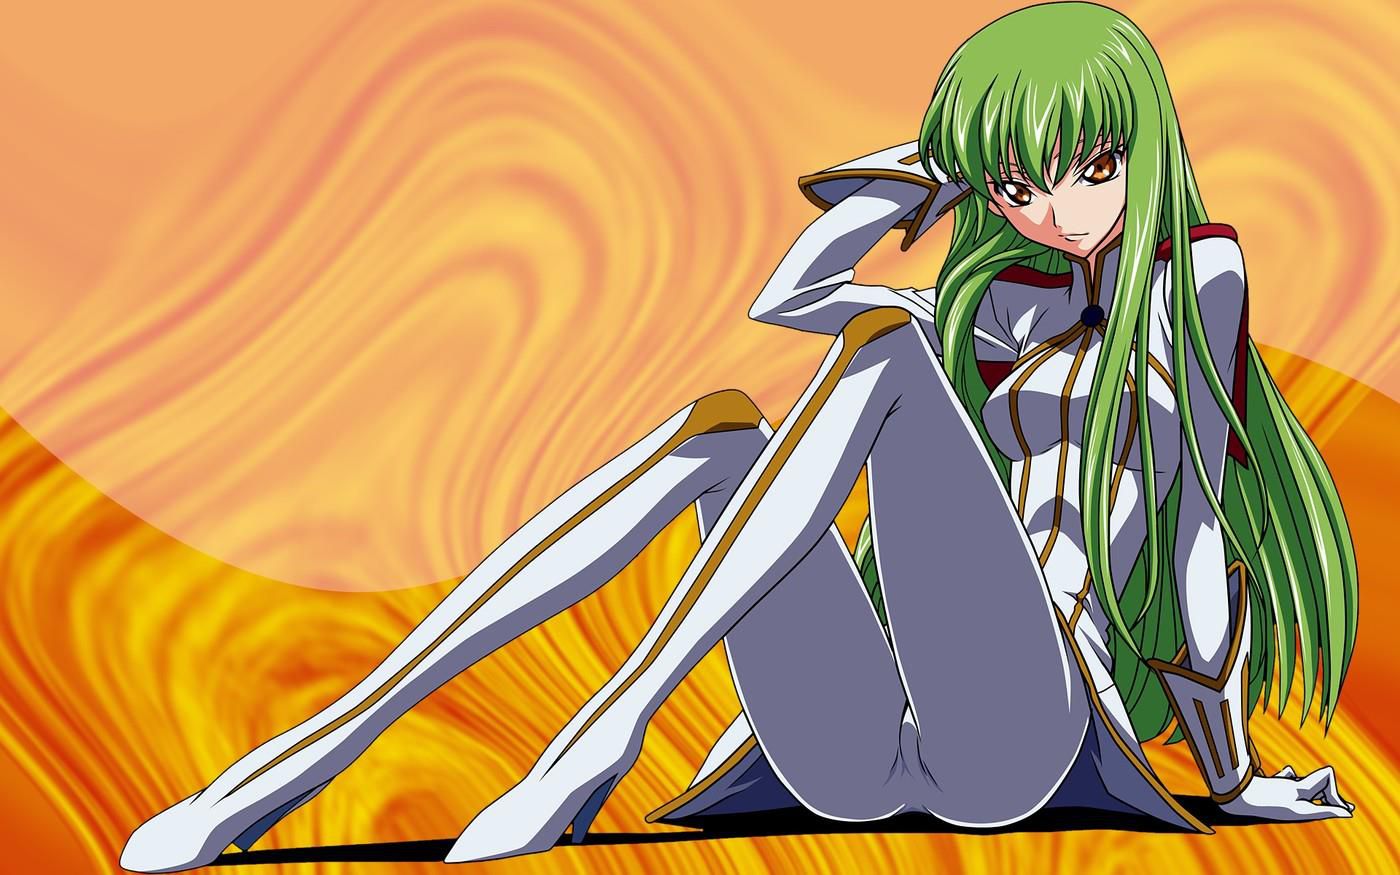 Secondary Code Geass hentai pictures 19